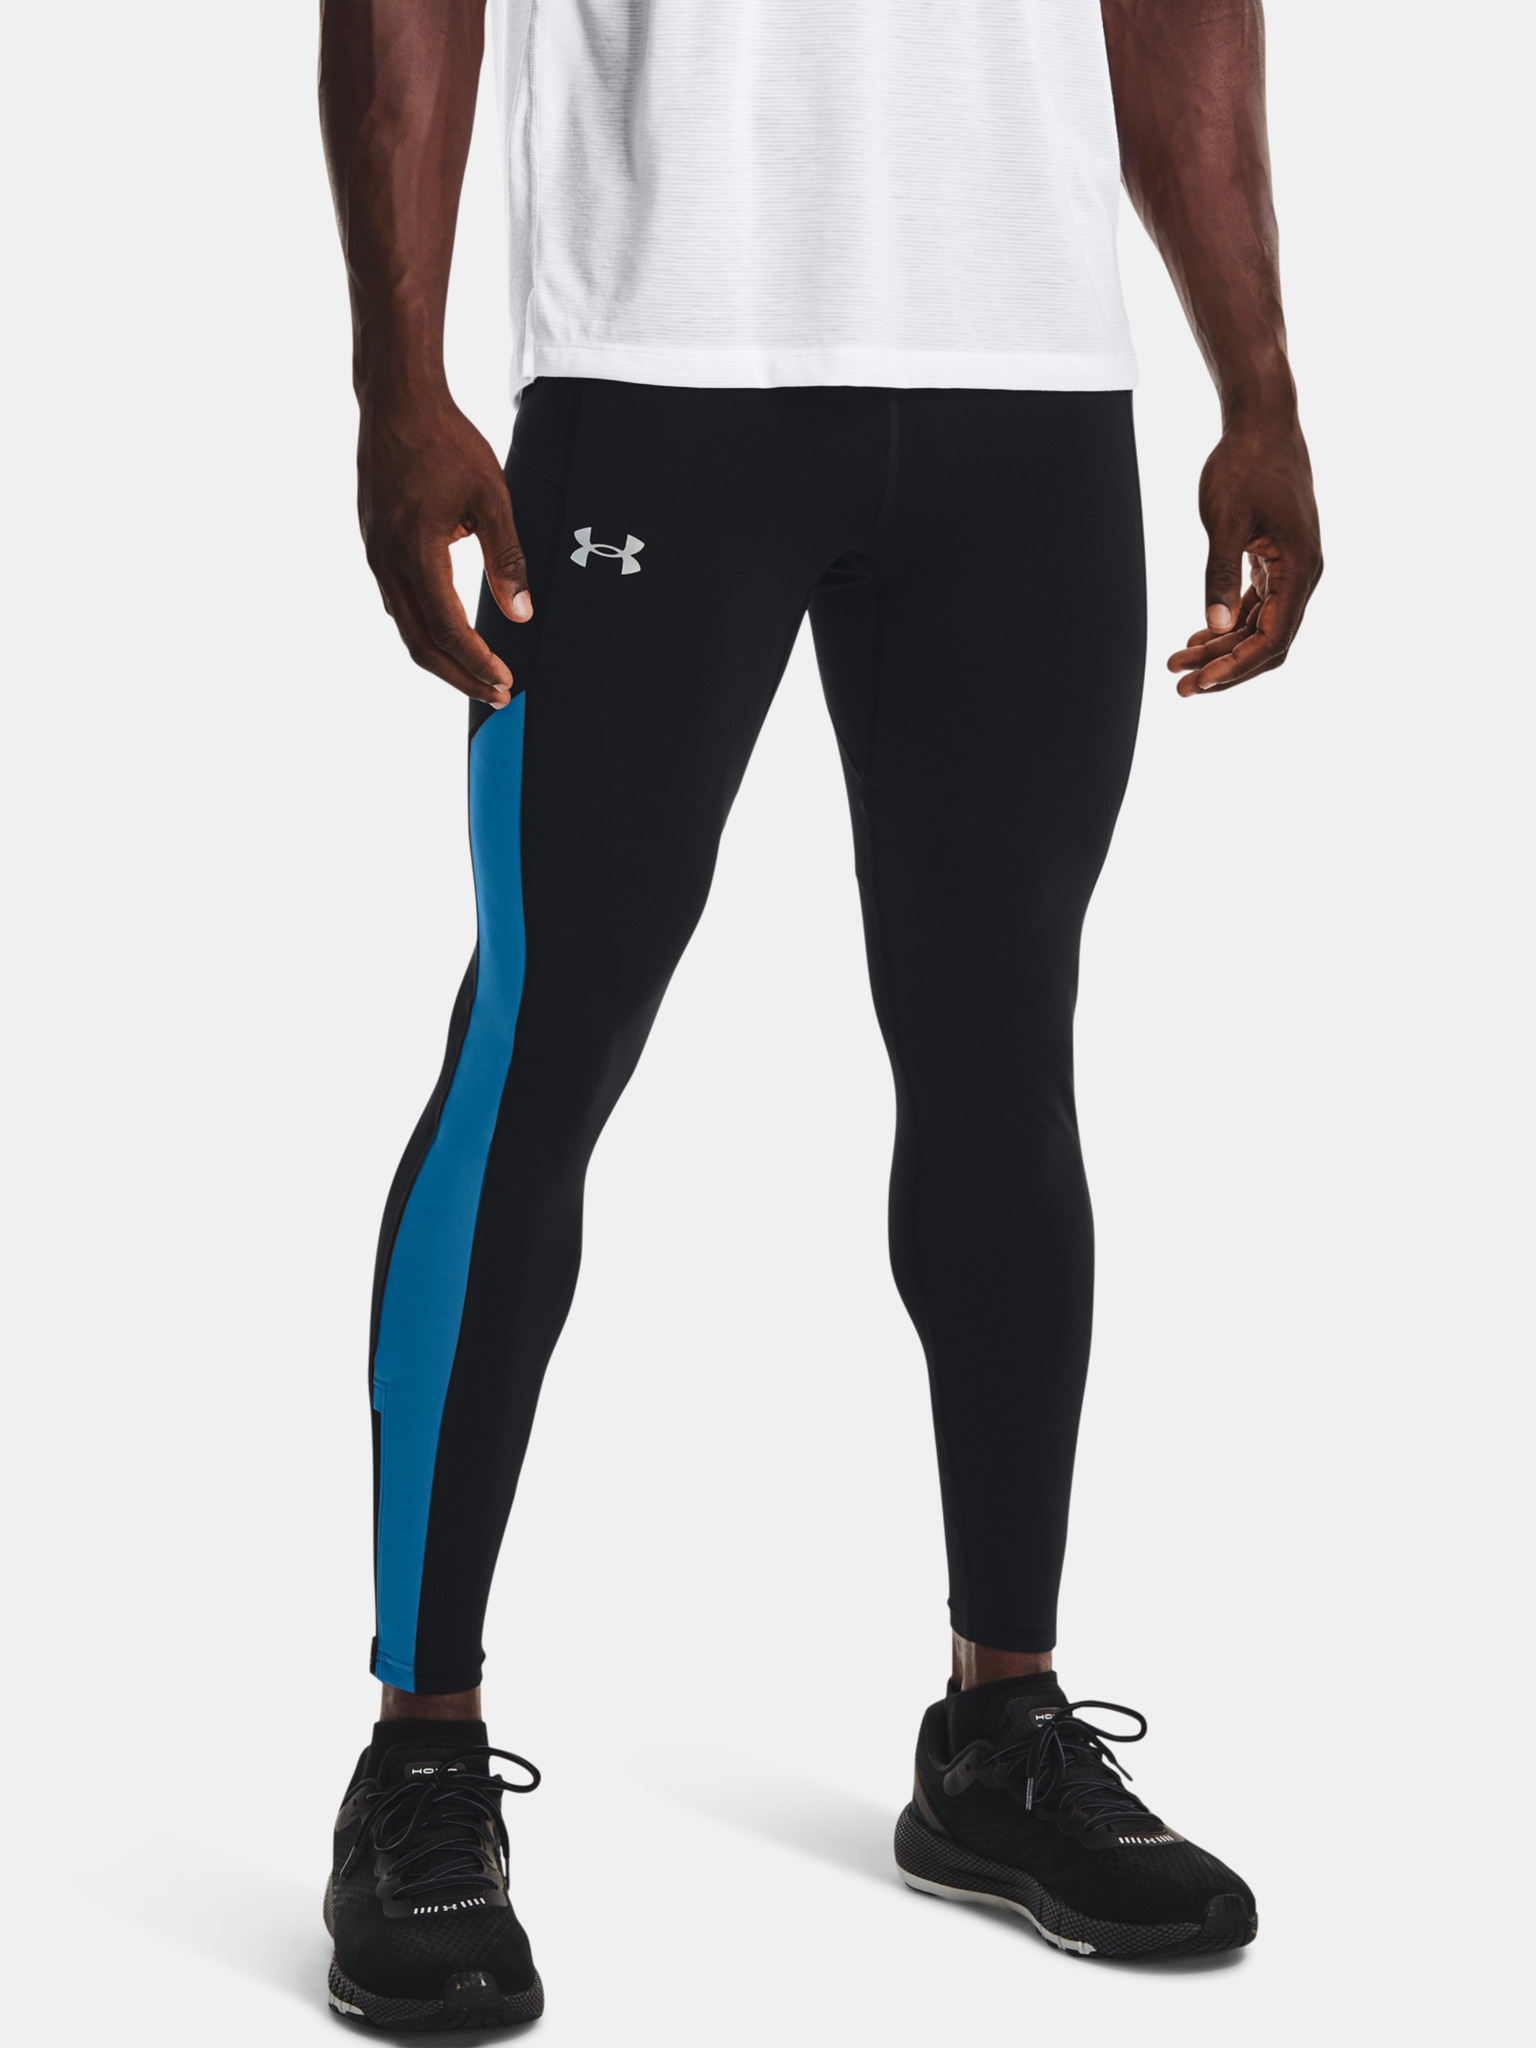 Under Armour Mens Fly Fast 3.0 Tight Pocket Stretch Black S